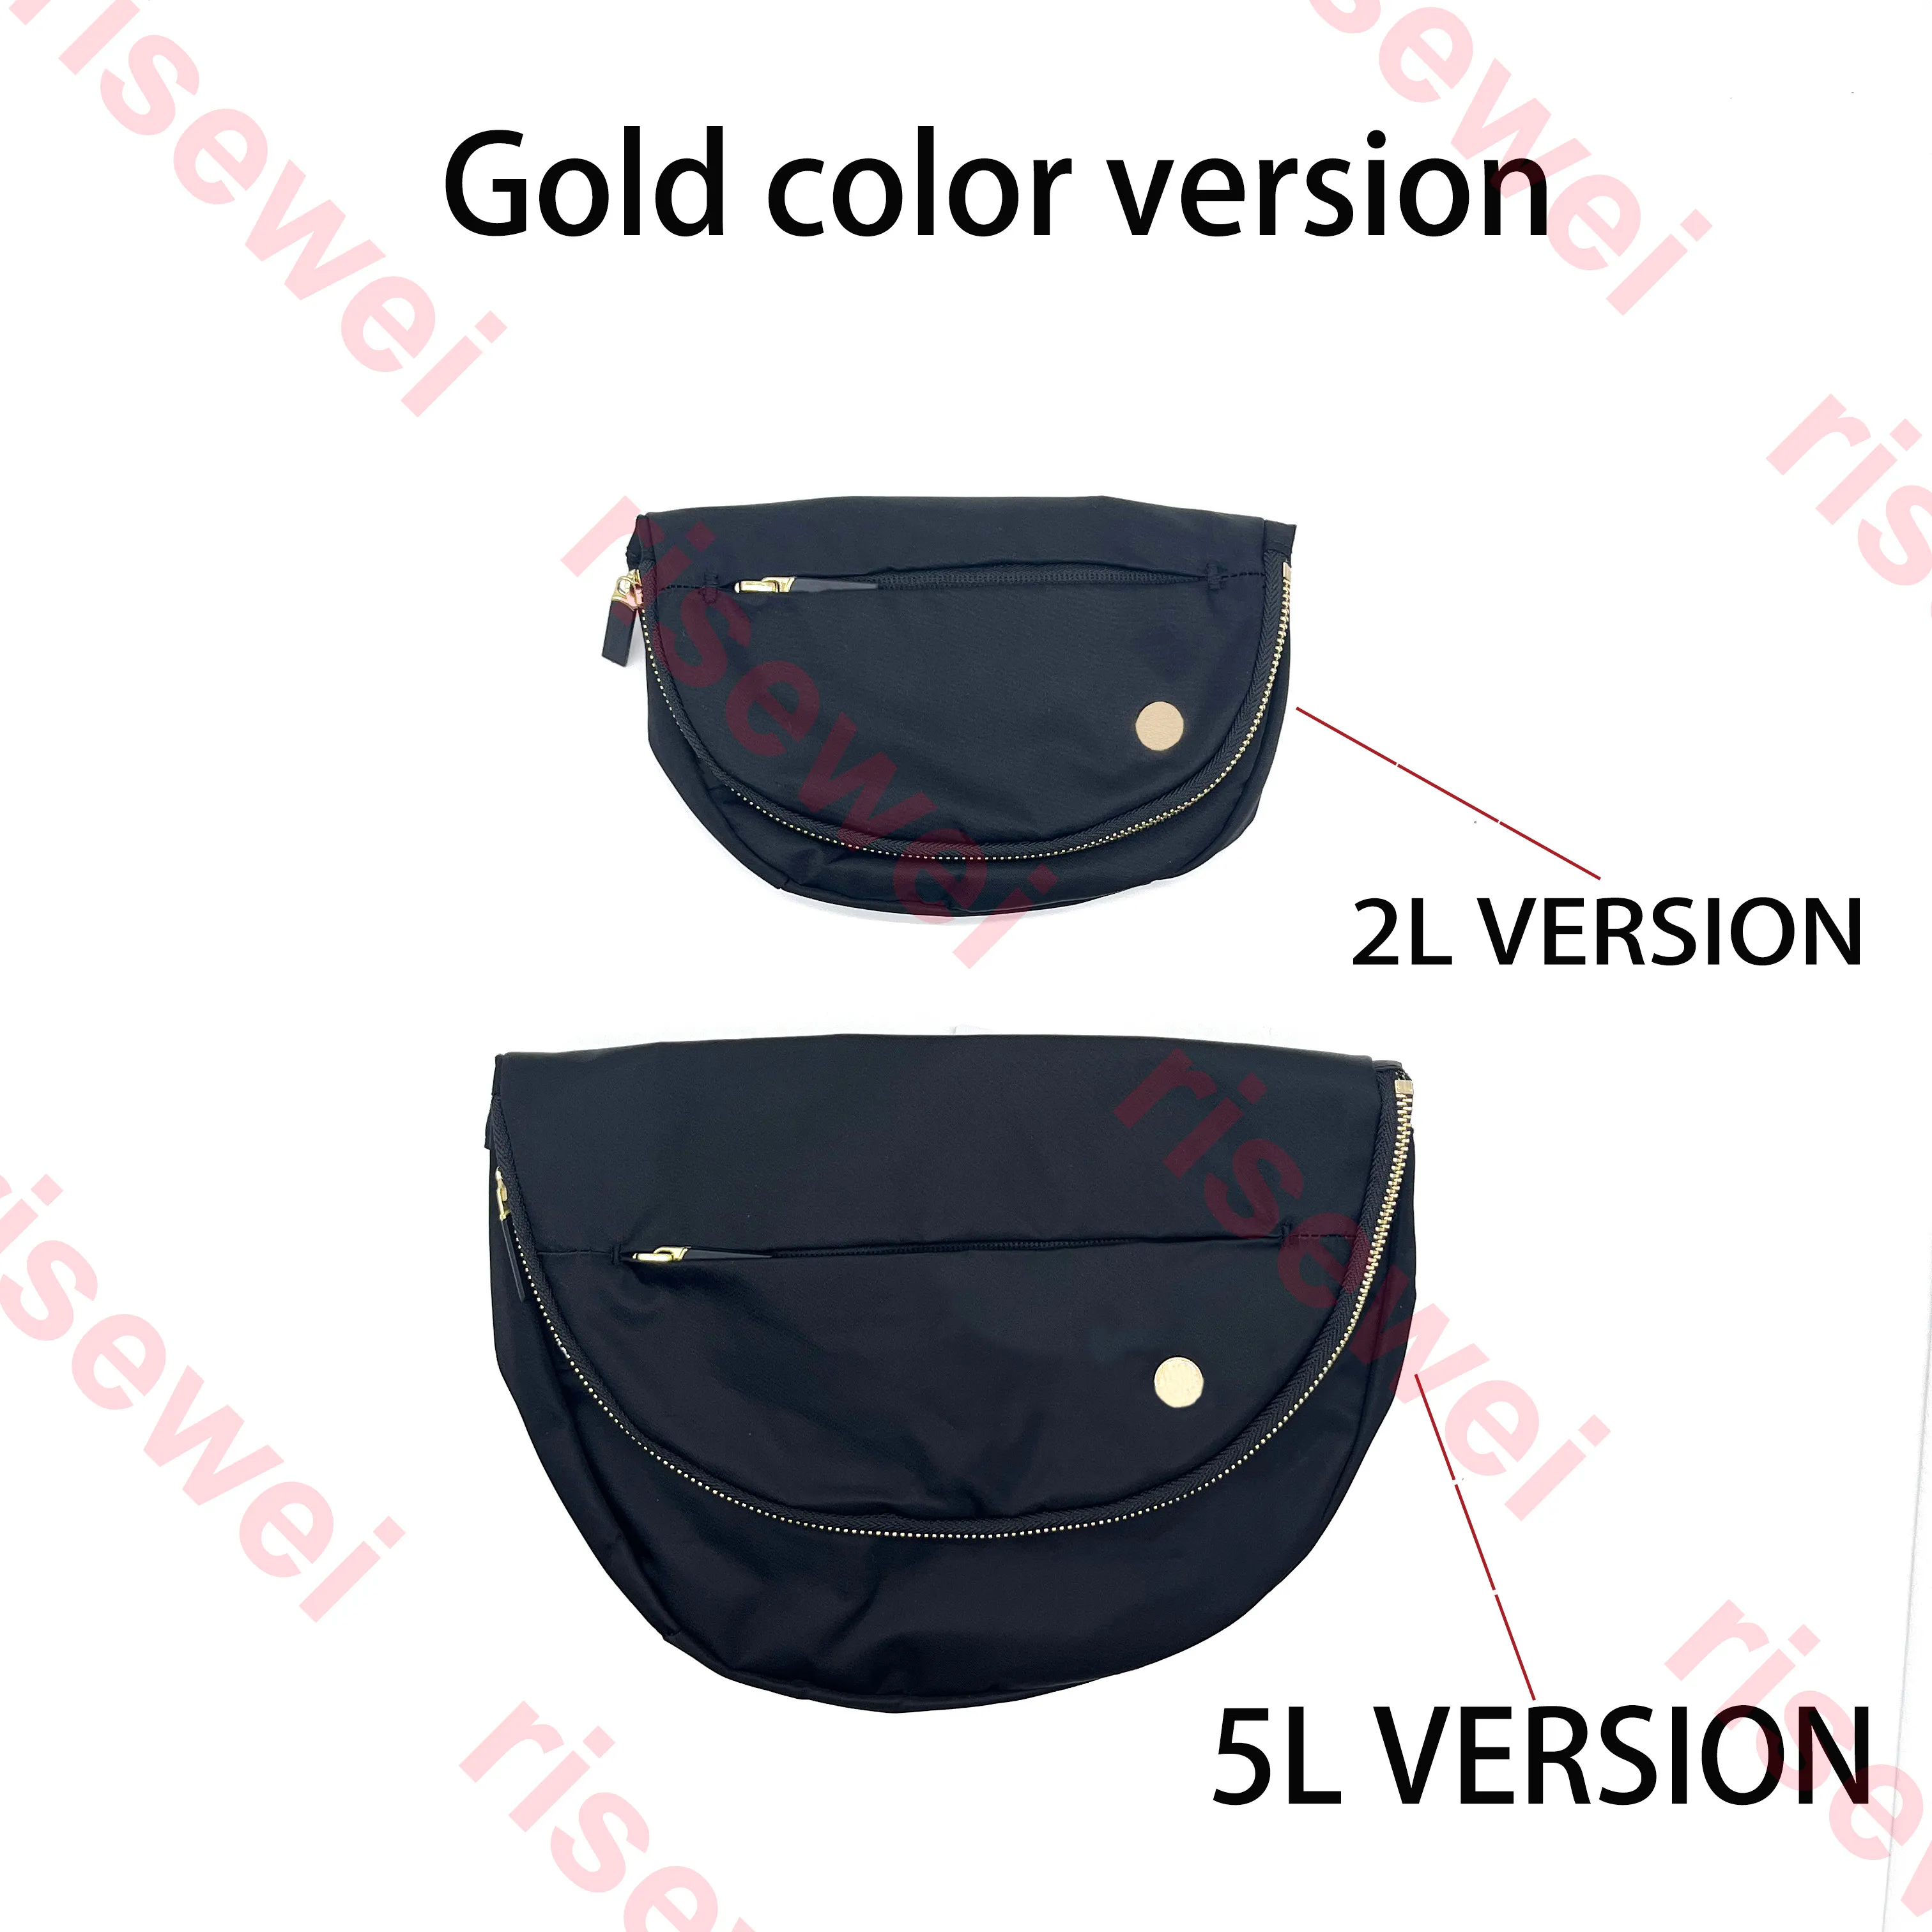 Lu All Night Festival Bag Version couleur or Micro 2L Risewei multifonctionnel Fitness Yoga sac extérieur Lu All Night Festival Bag 5L